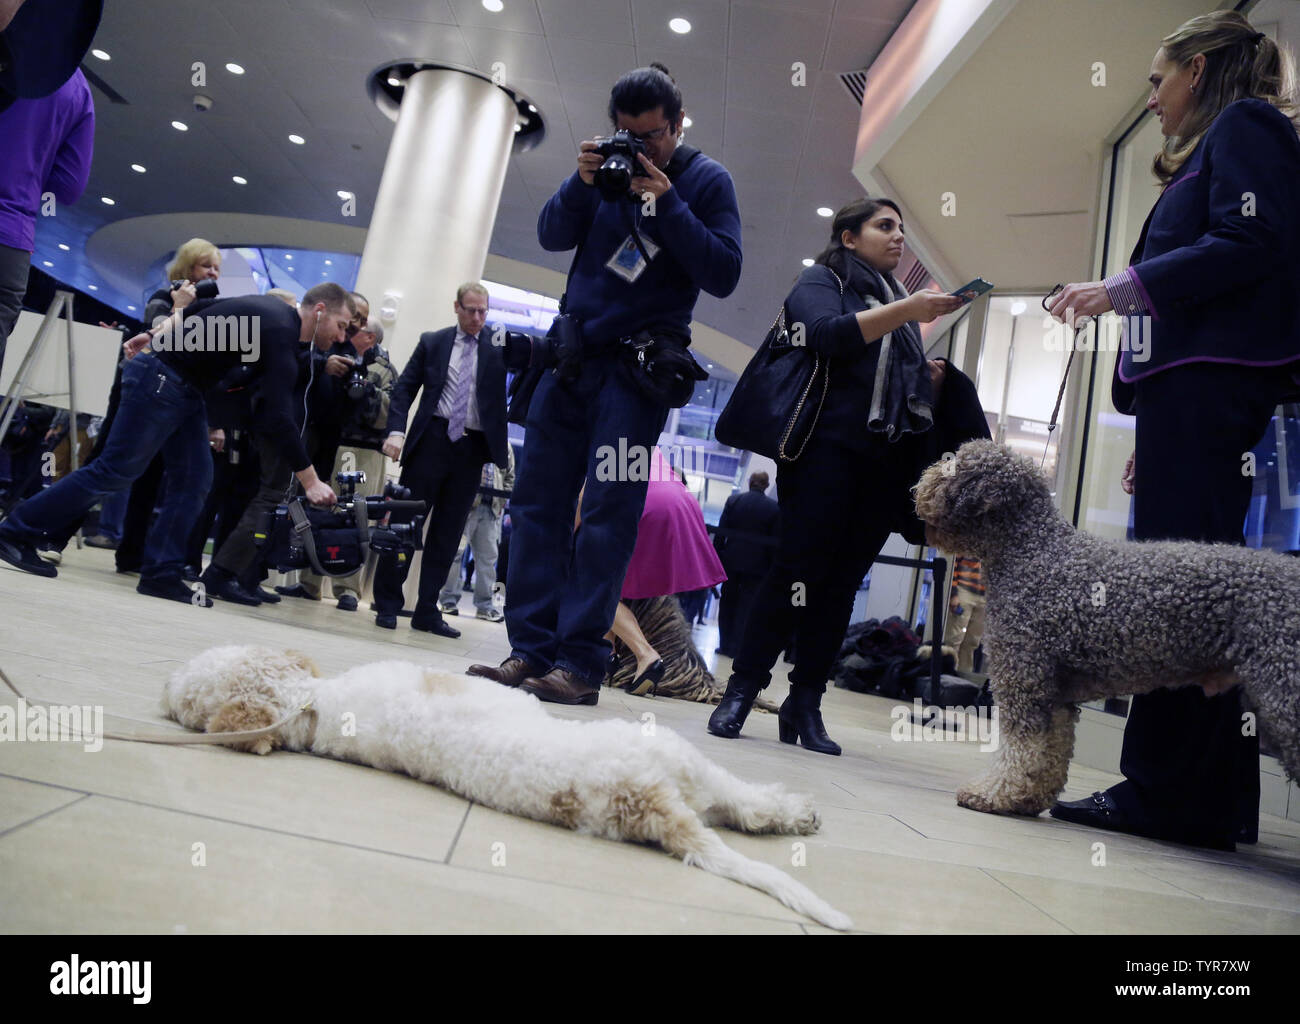 Photographers and reporters work at an event introducing the new competing breeds of dogs at a press conference just weeks before the 140th Annual Westminster Kennel Club Dog Show at Madison Square Garden in New York City on January 21, 2016. The first Westminster show was held on May 8, 1877, making it the second-longest continuously held sporting event in the United States behind only the Kentucky Derby, which was first held in 1875.  Photo by John Angelillo/UPI Stock Photo